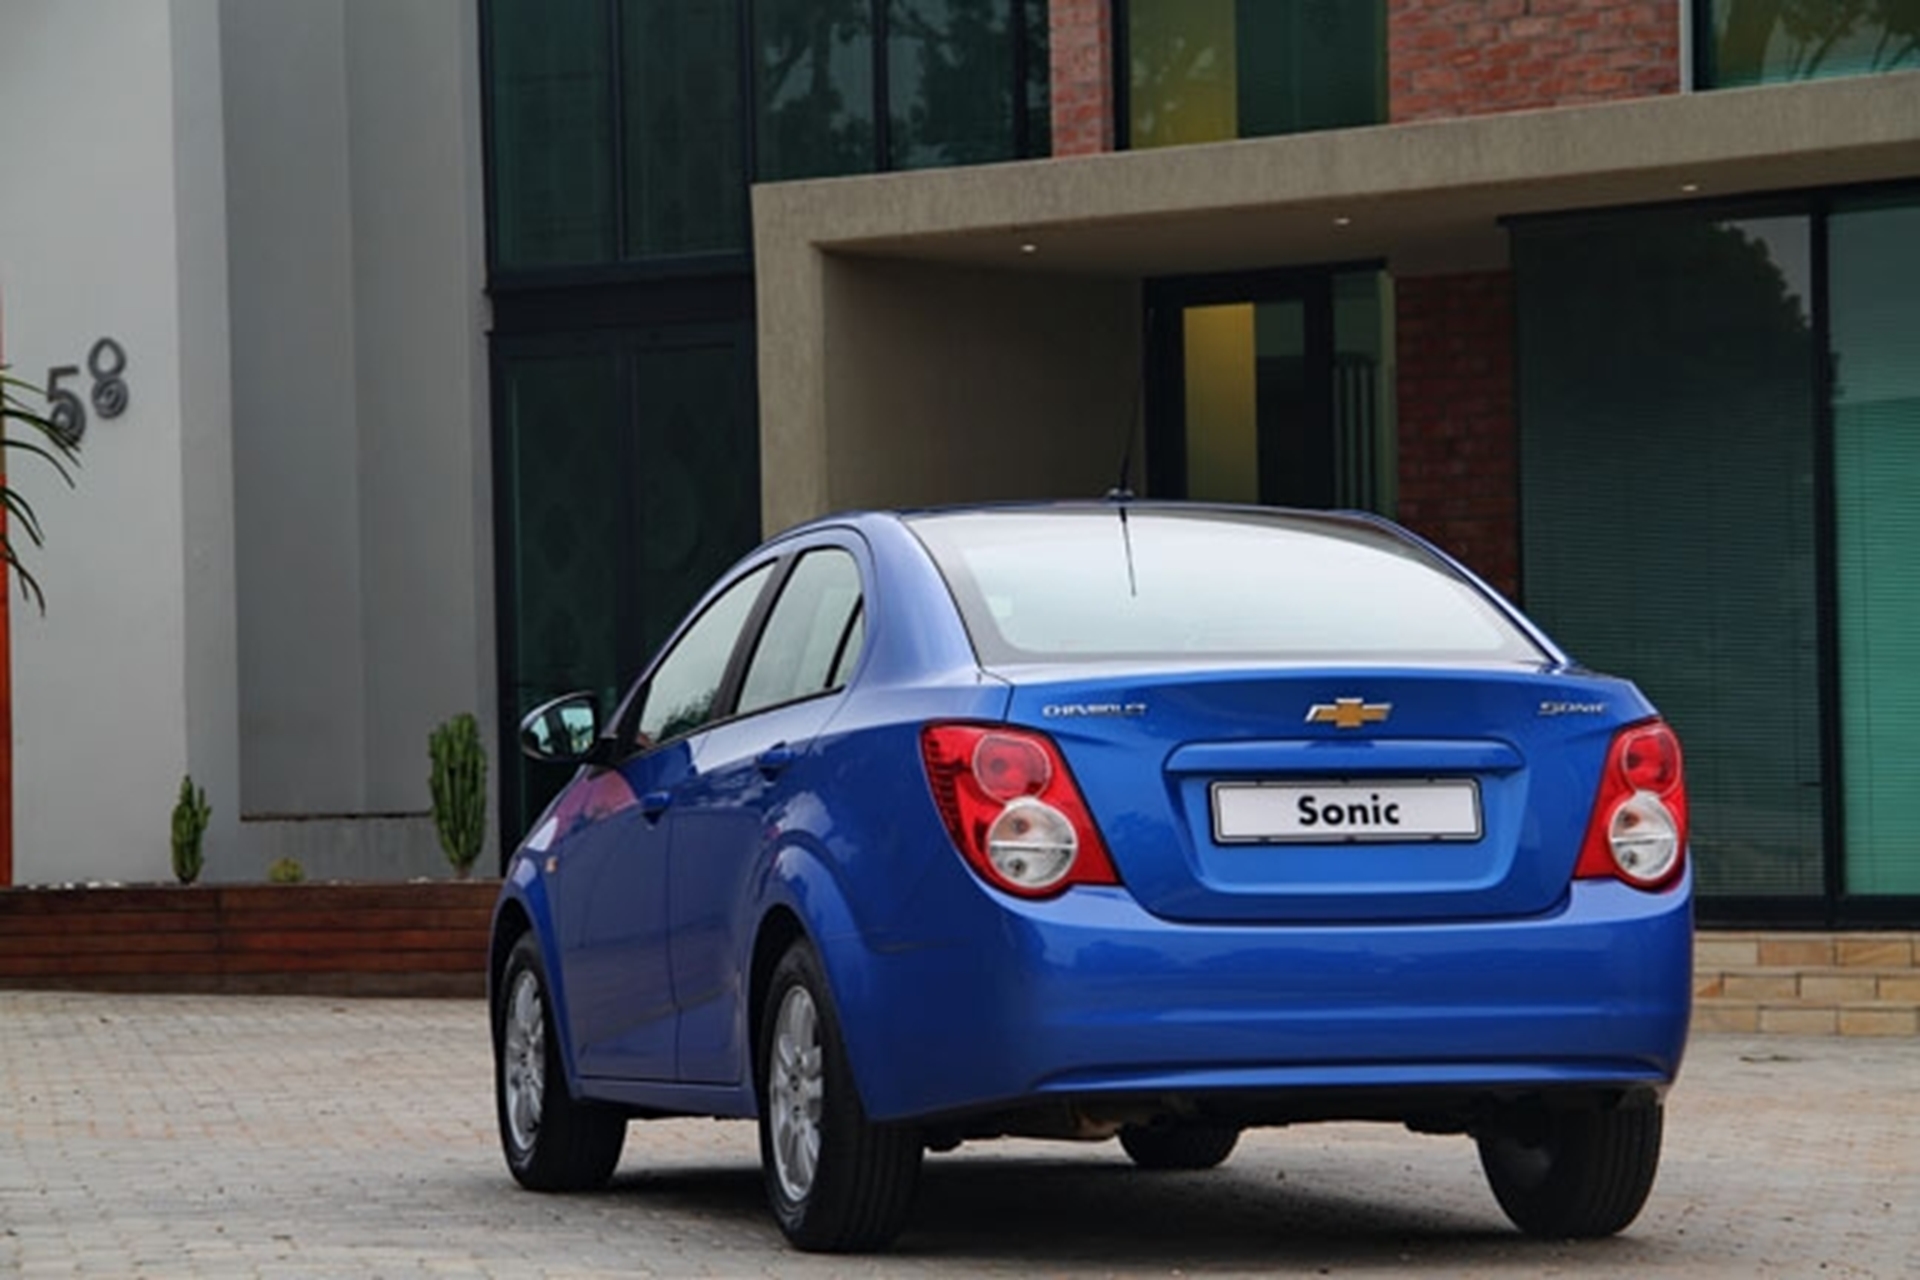 Chevrolet Introduces 6-Speed Auto Transmission to Small Car Class in Sonic Sedan